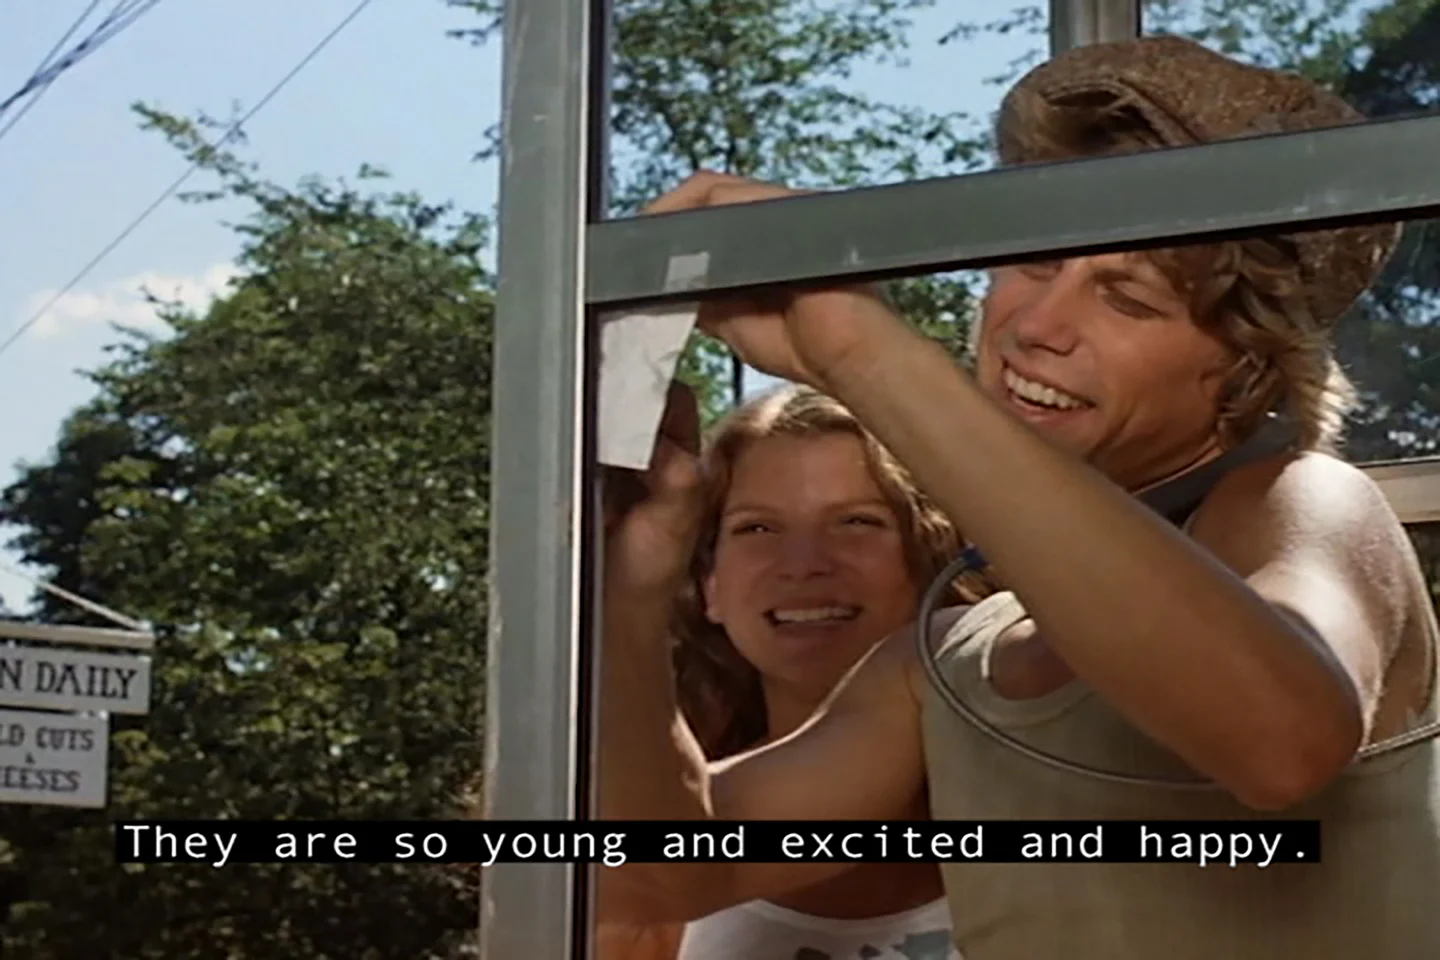 Movie still, close-up of a white man and woman wearing summer clothes in a rural setting looking excited in a phone booth. A caption reads “They are so young and excited and happy.